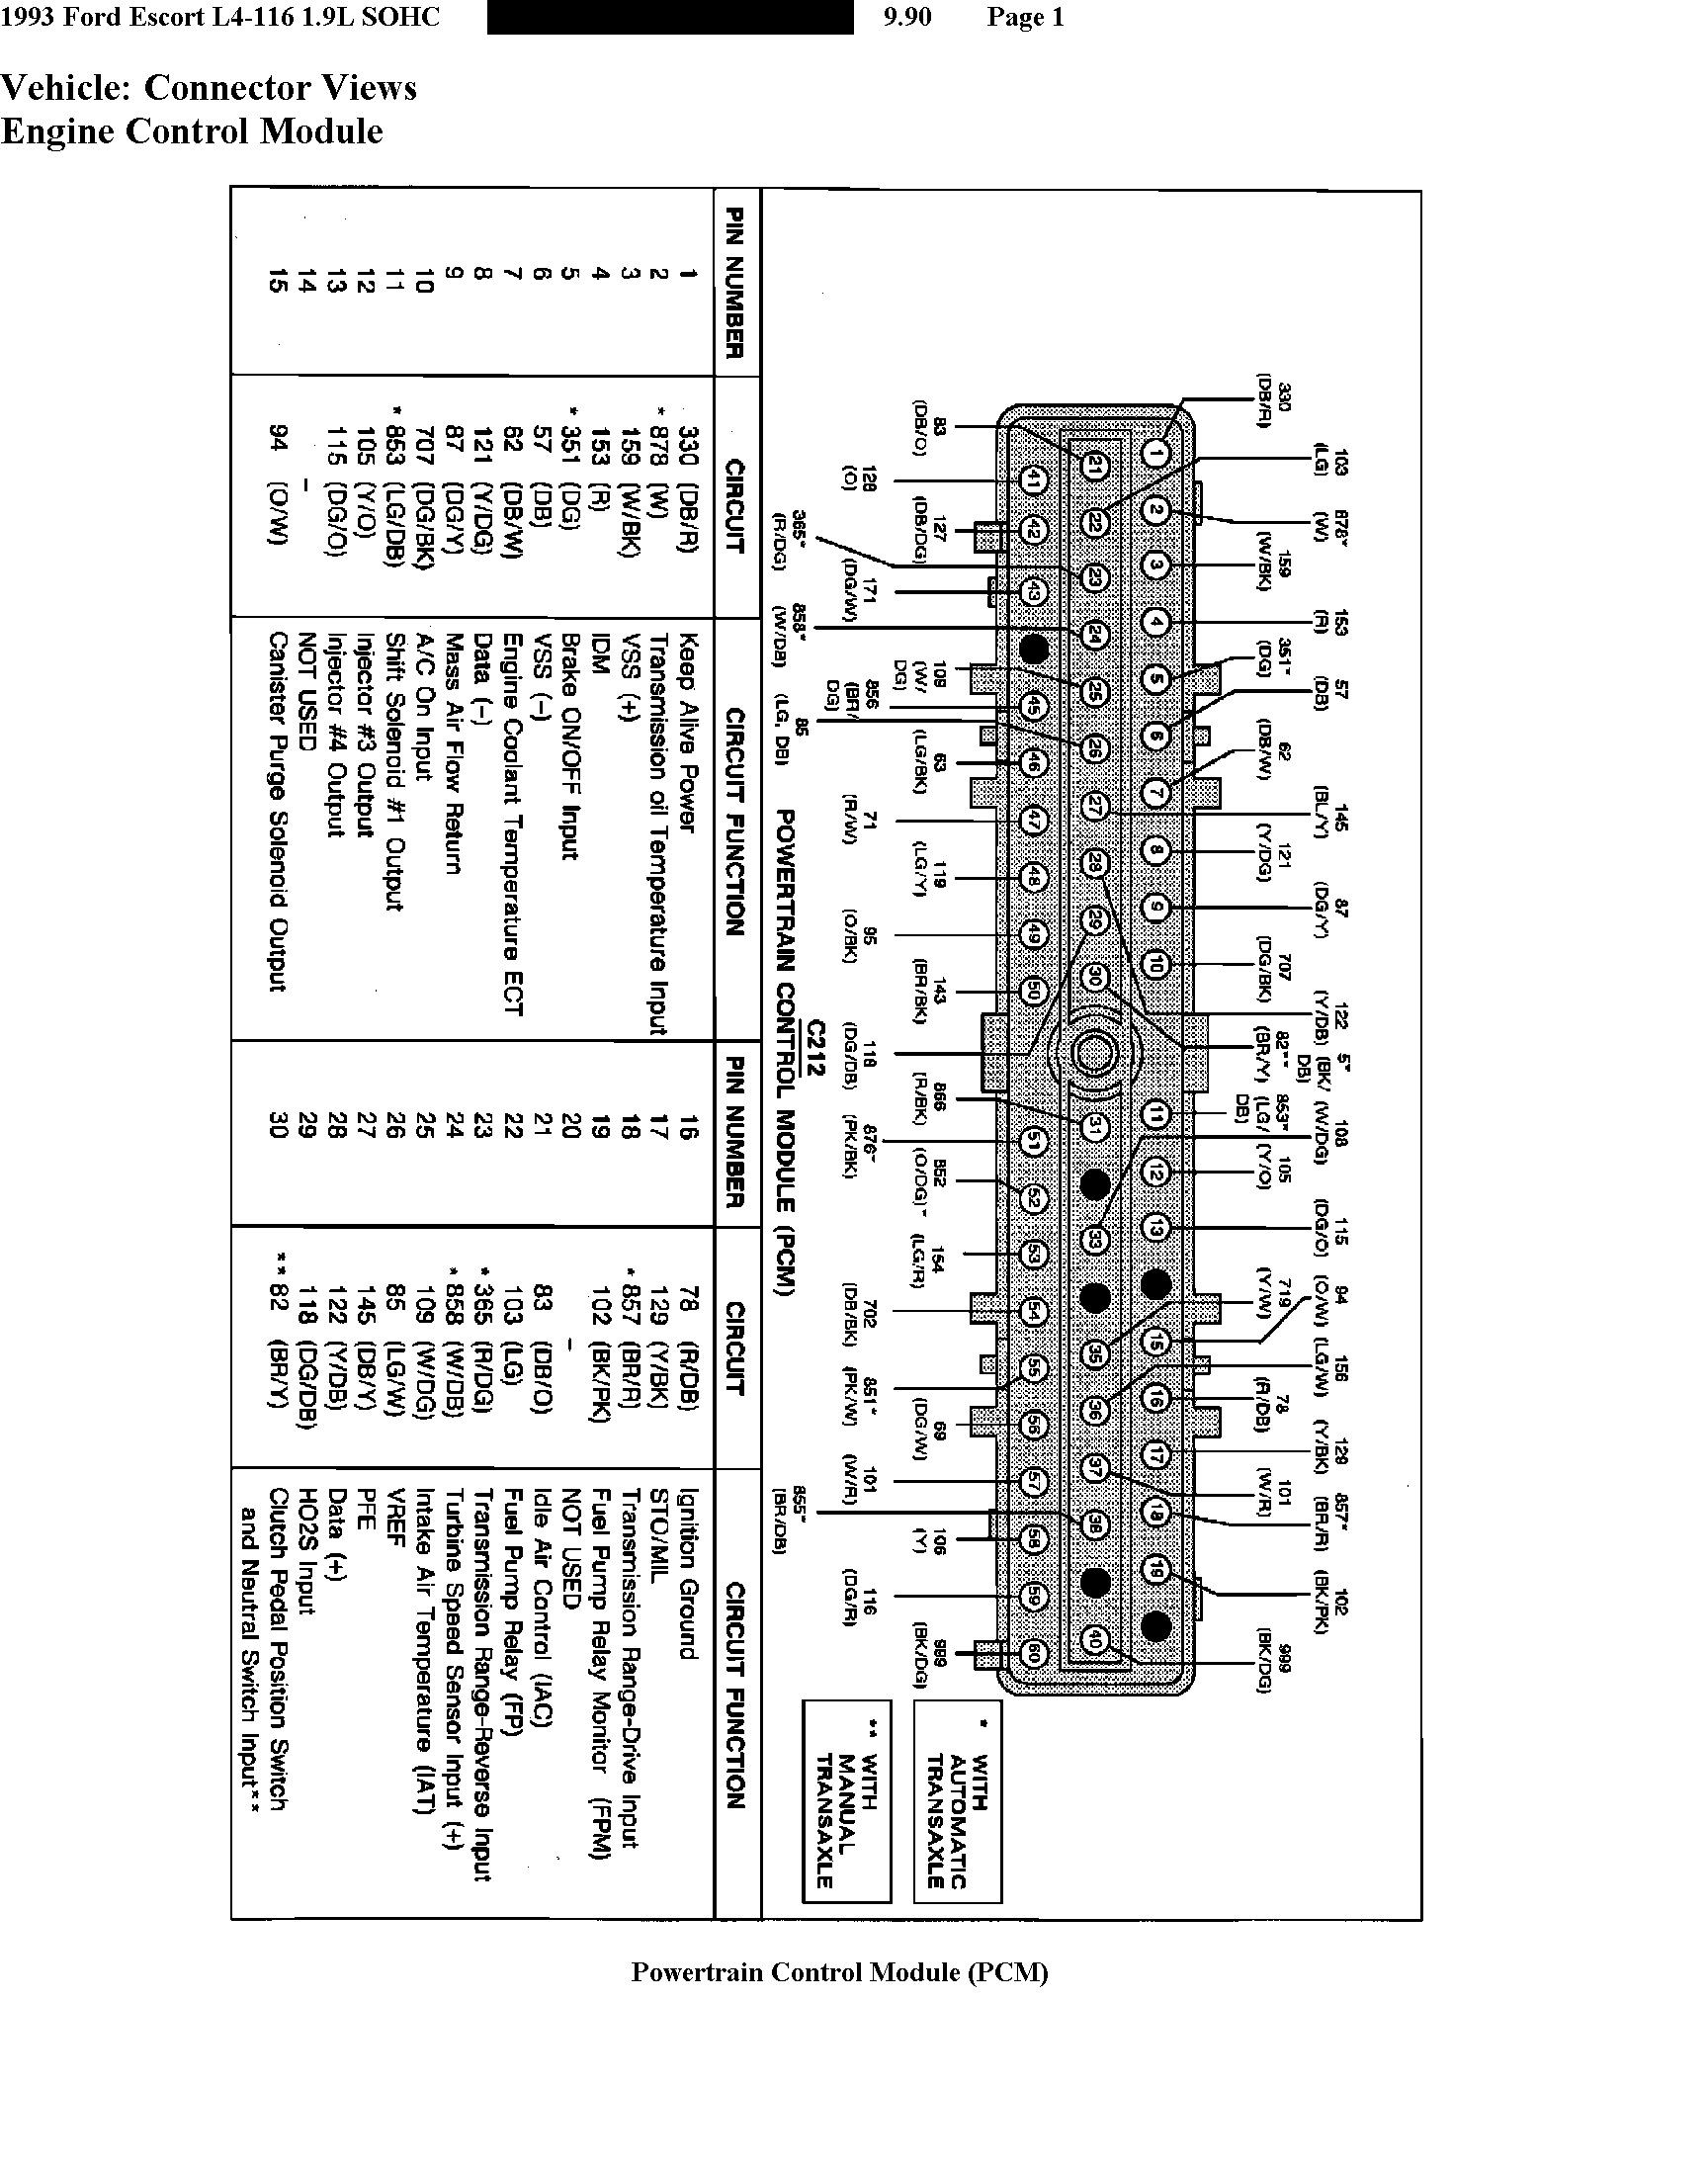 Ford Escort Engine Diagram Awesome 1997 ford Escort Wiring Diagram S Everything You Need Of Ford Escort Engine Diagram